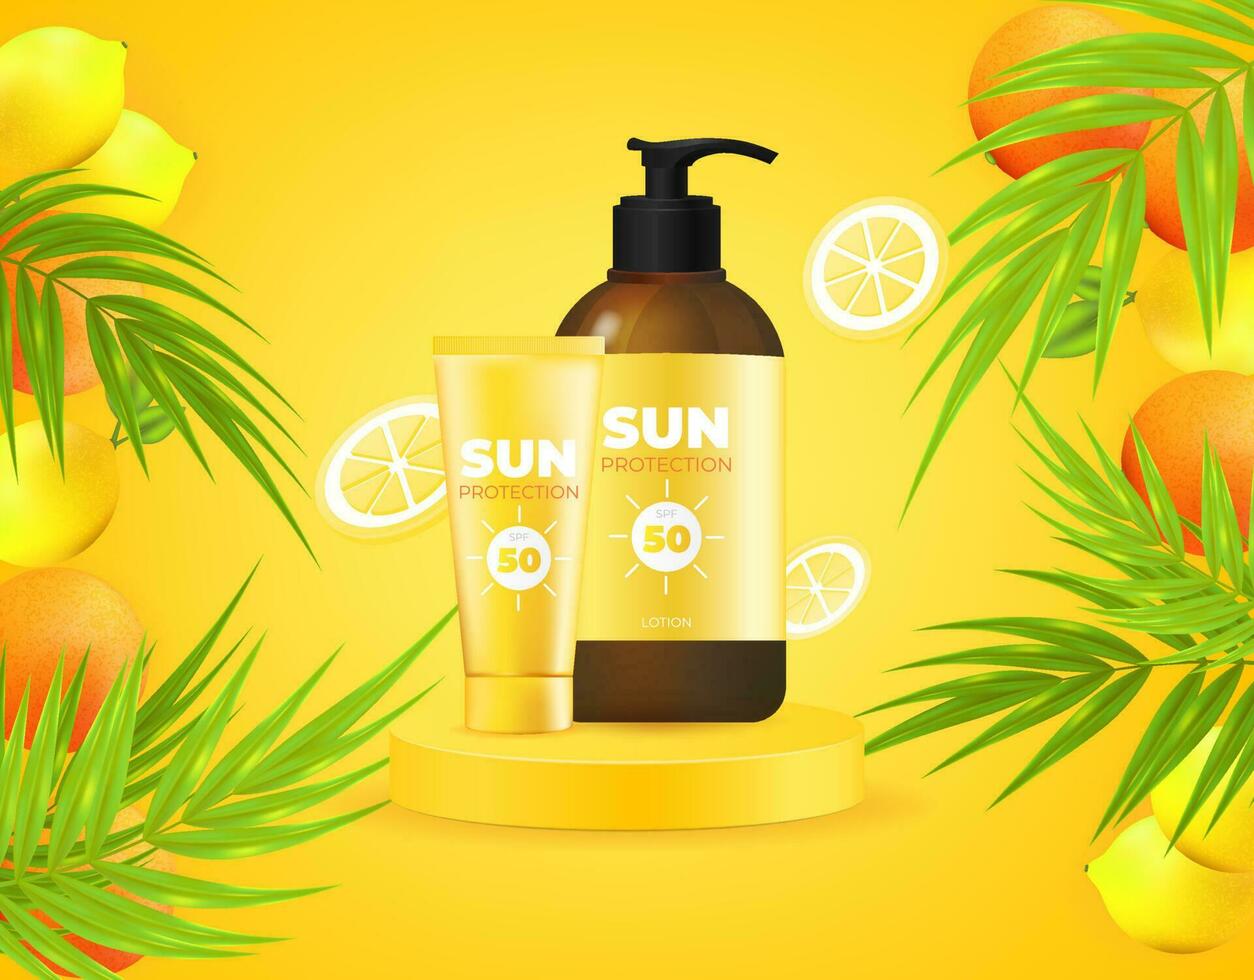 Vector collection of 3D sunscreen tube and bottle with a tropical theme. Realistic image with yellow background, perfect for summer skin care products. Includes fresh fruit and leaf elements